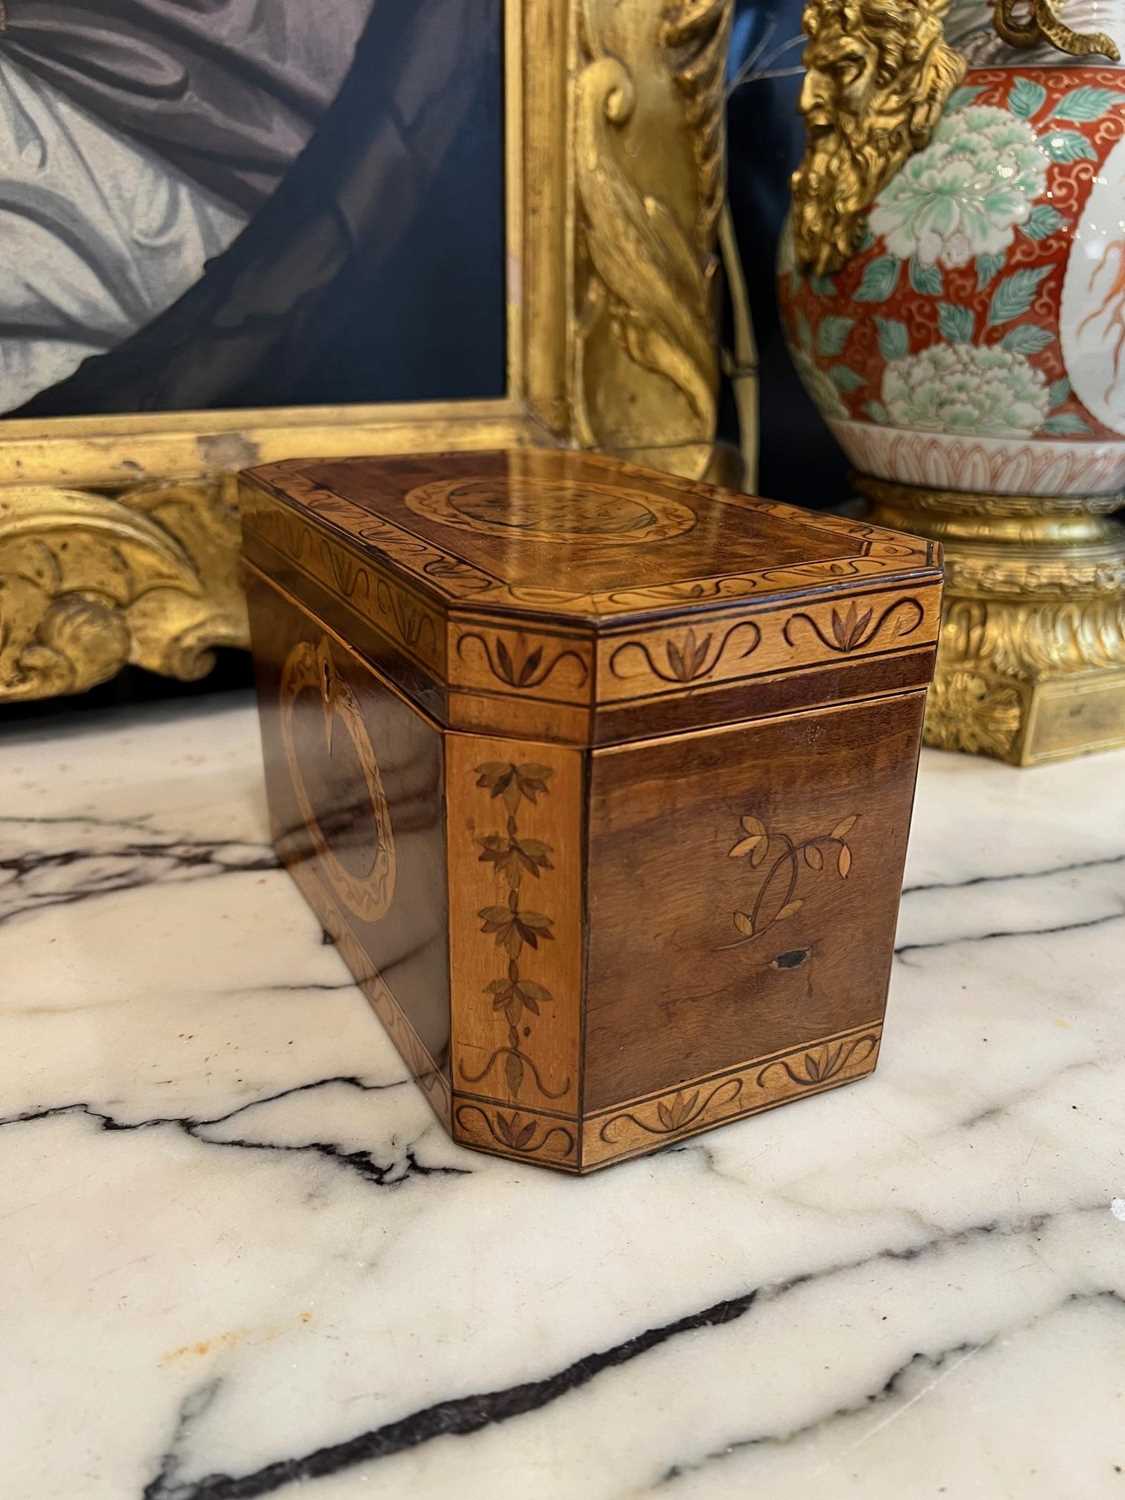 A FINE LATE 18TH / EARLY 19TH CENTURY INLAID SATINWOOD TEA CADDY - Image 3 of 7